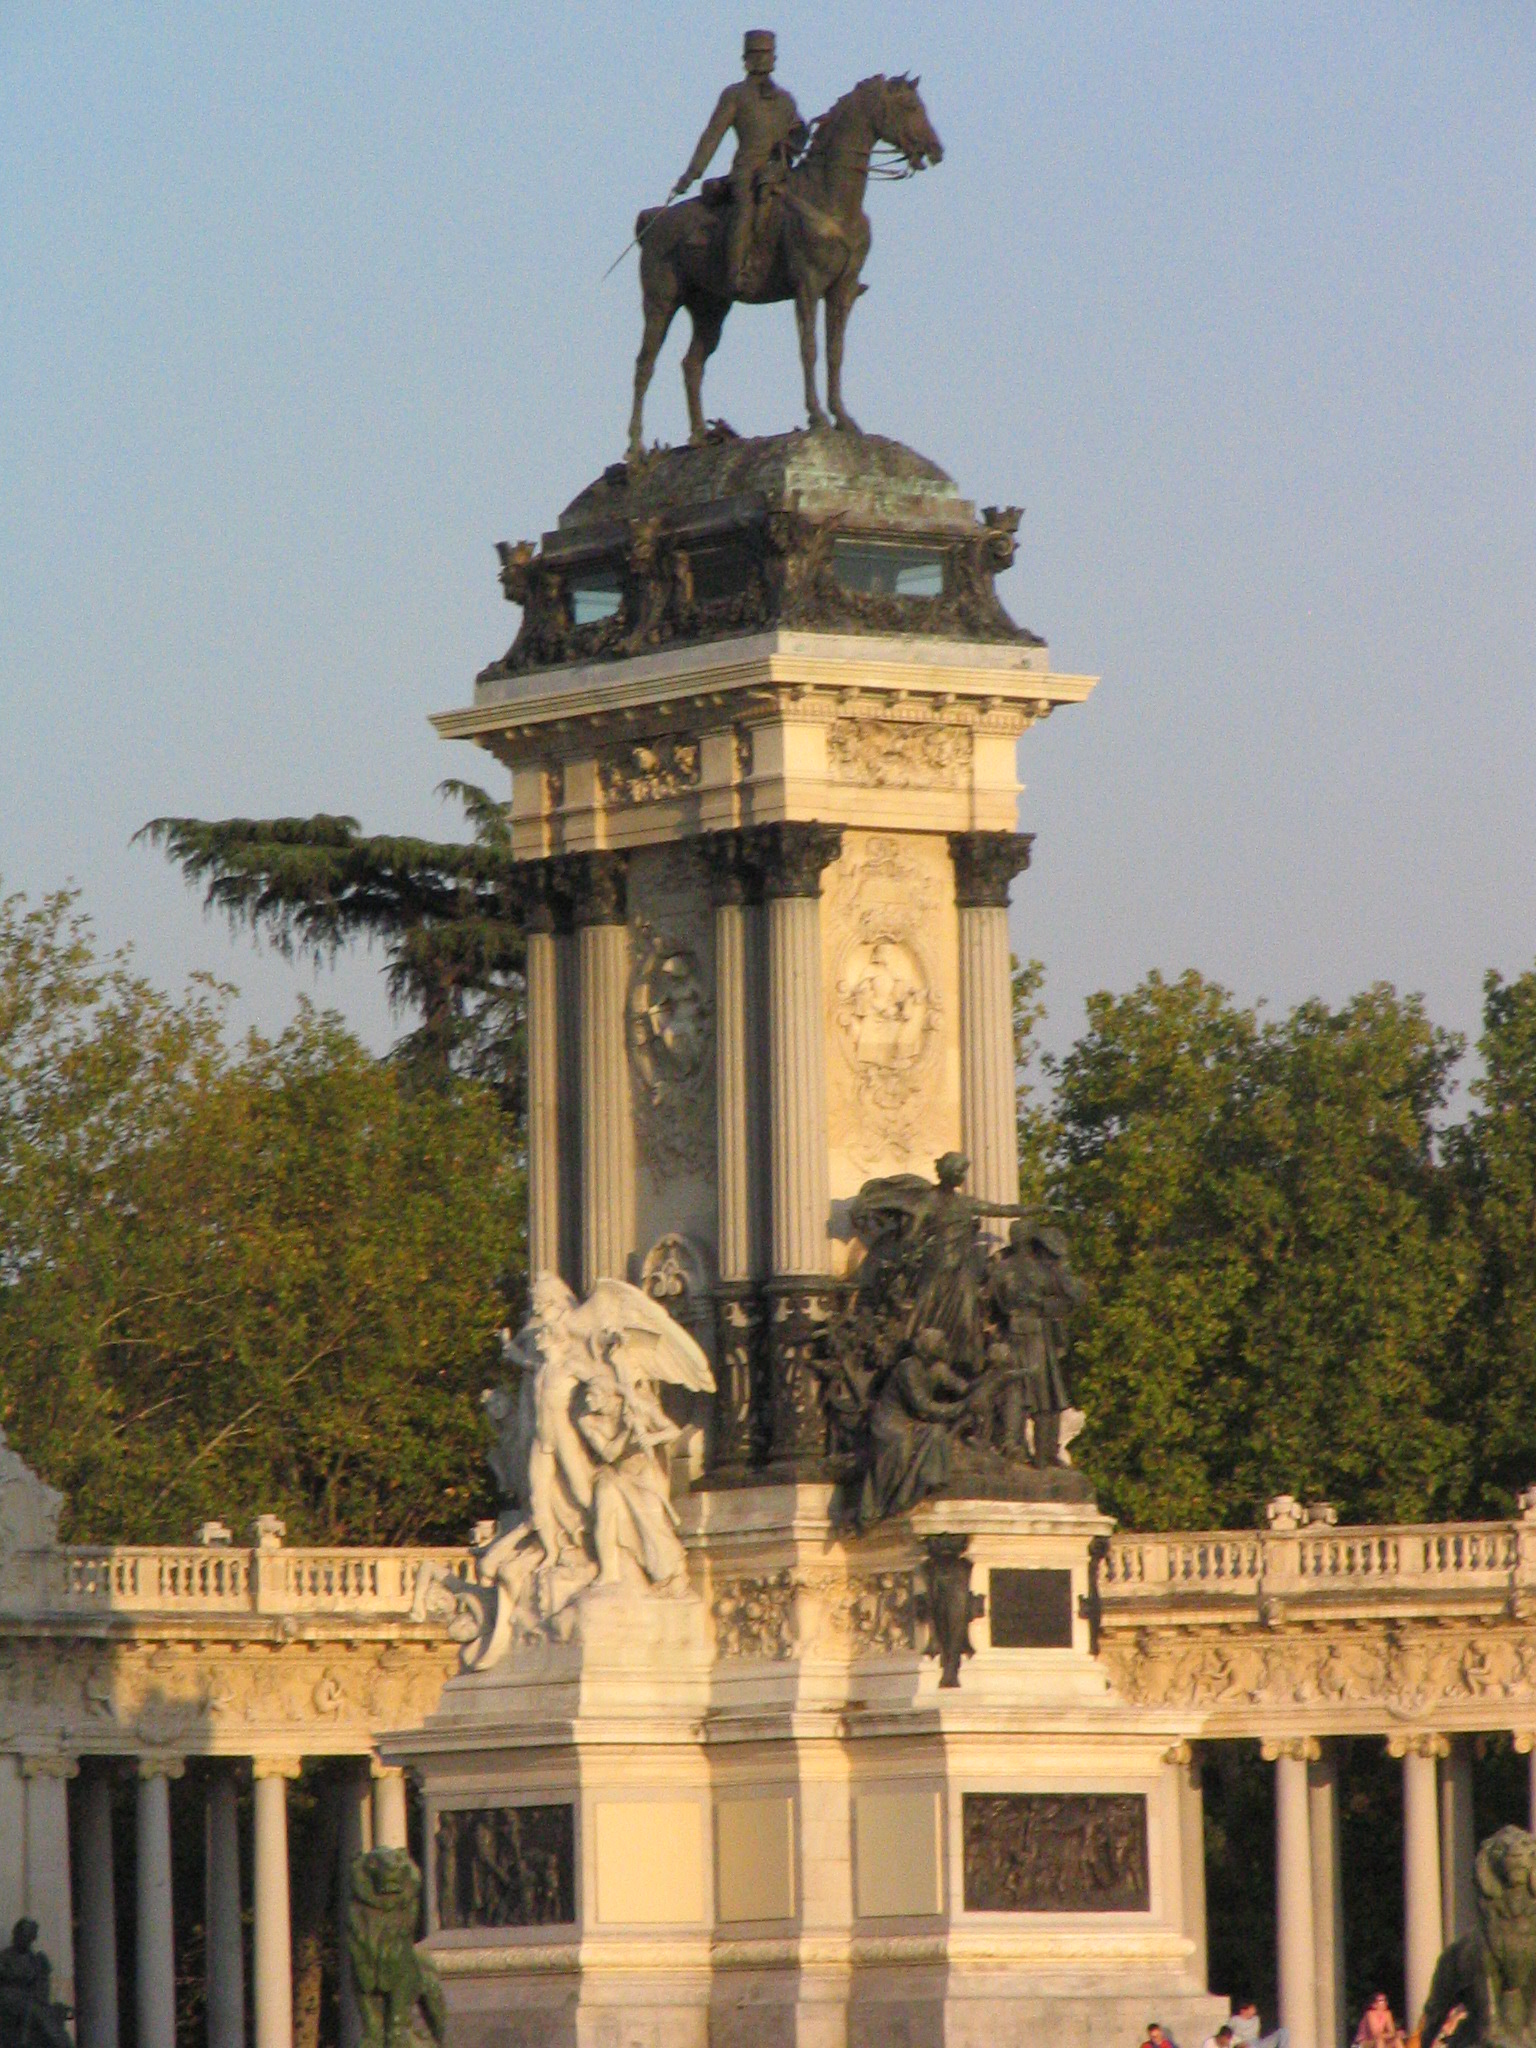 statue of man with a horse and rider on top of monument